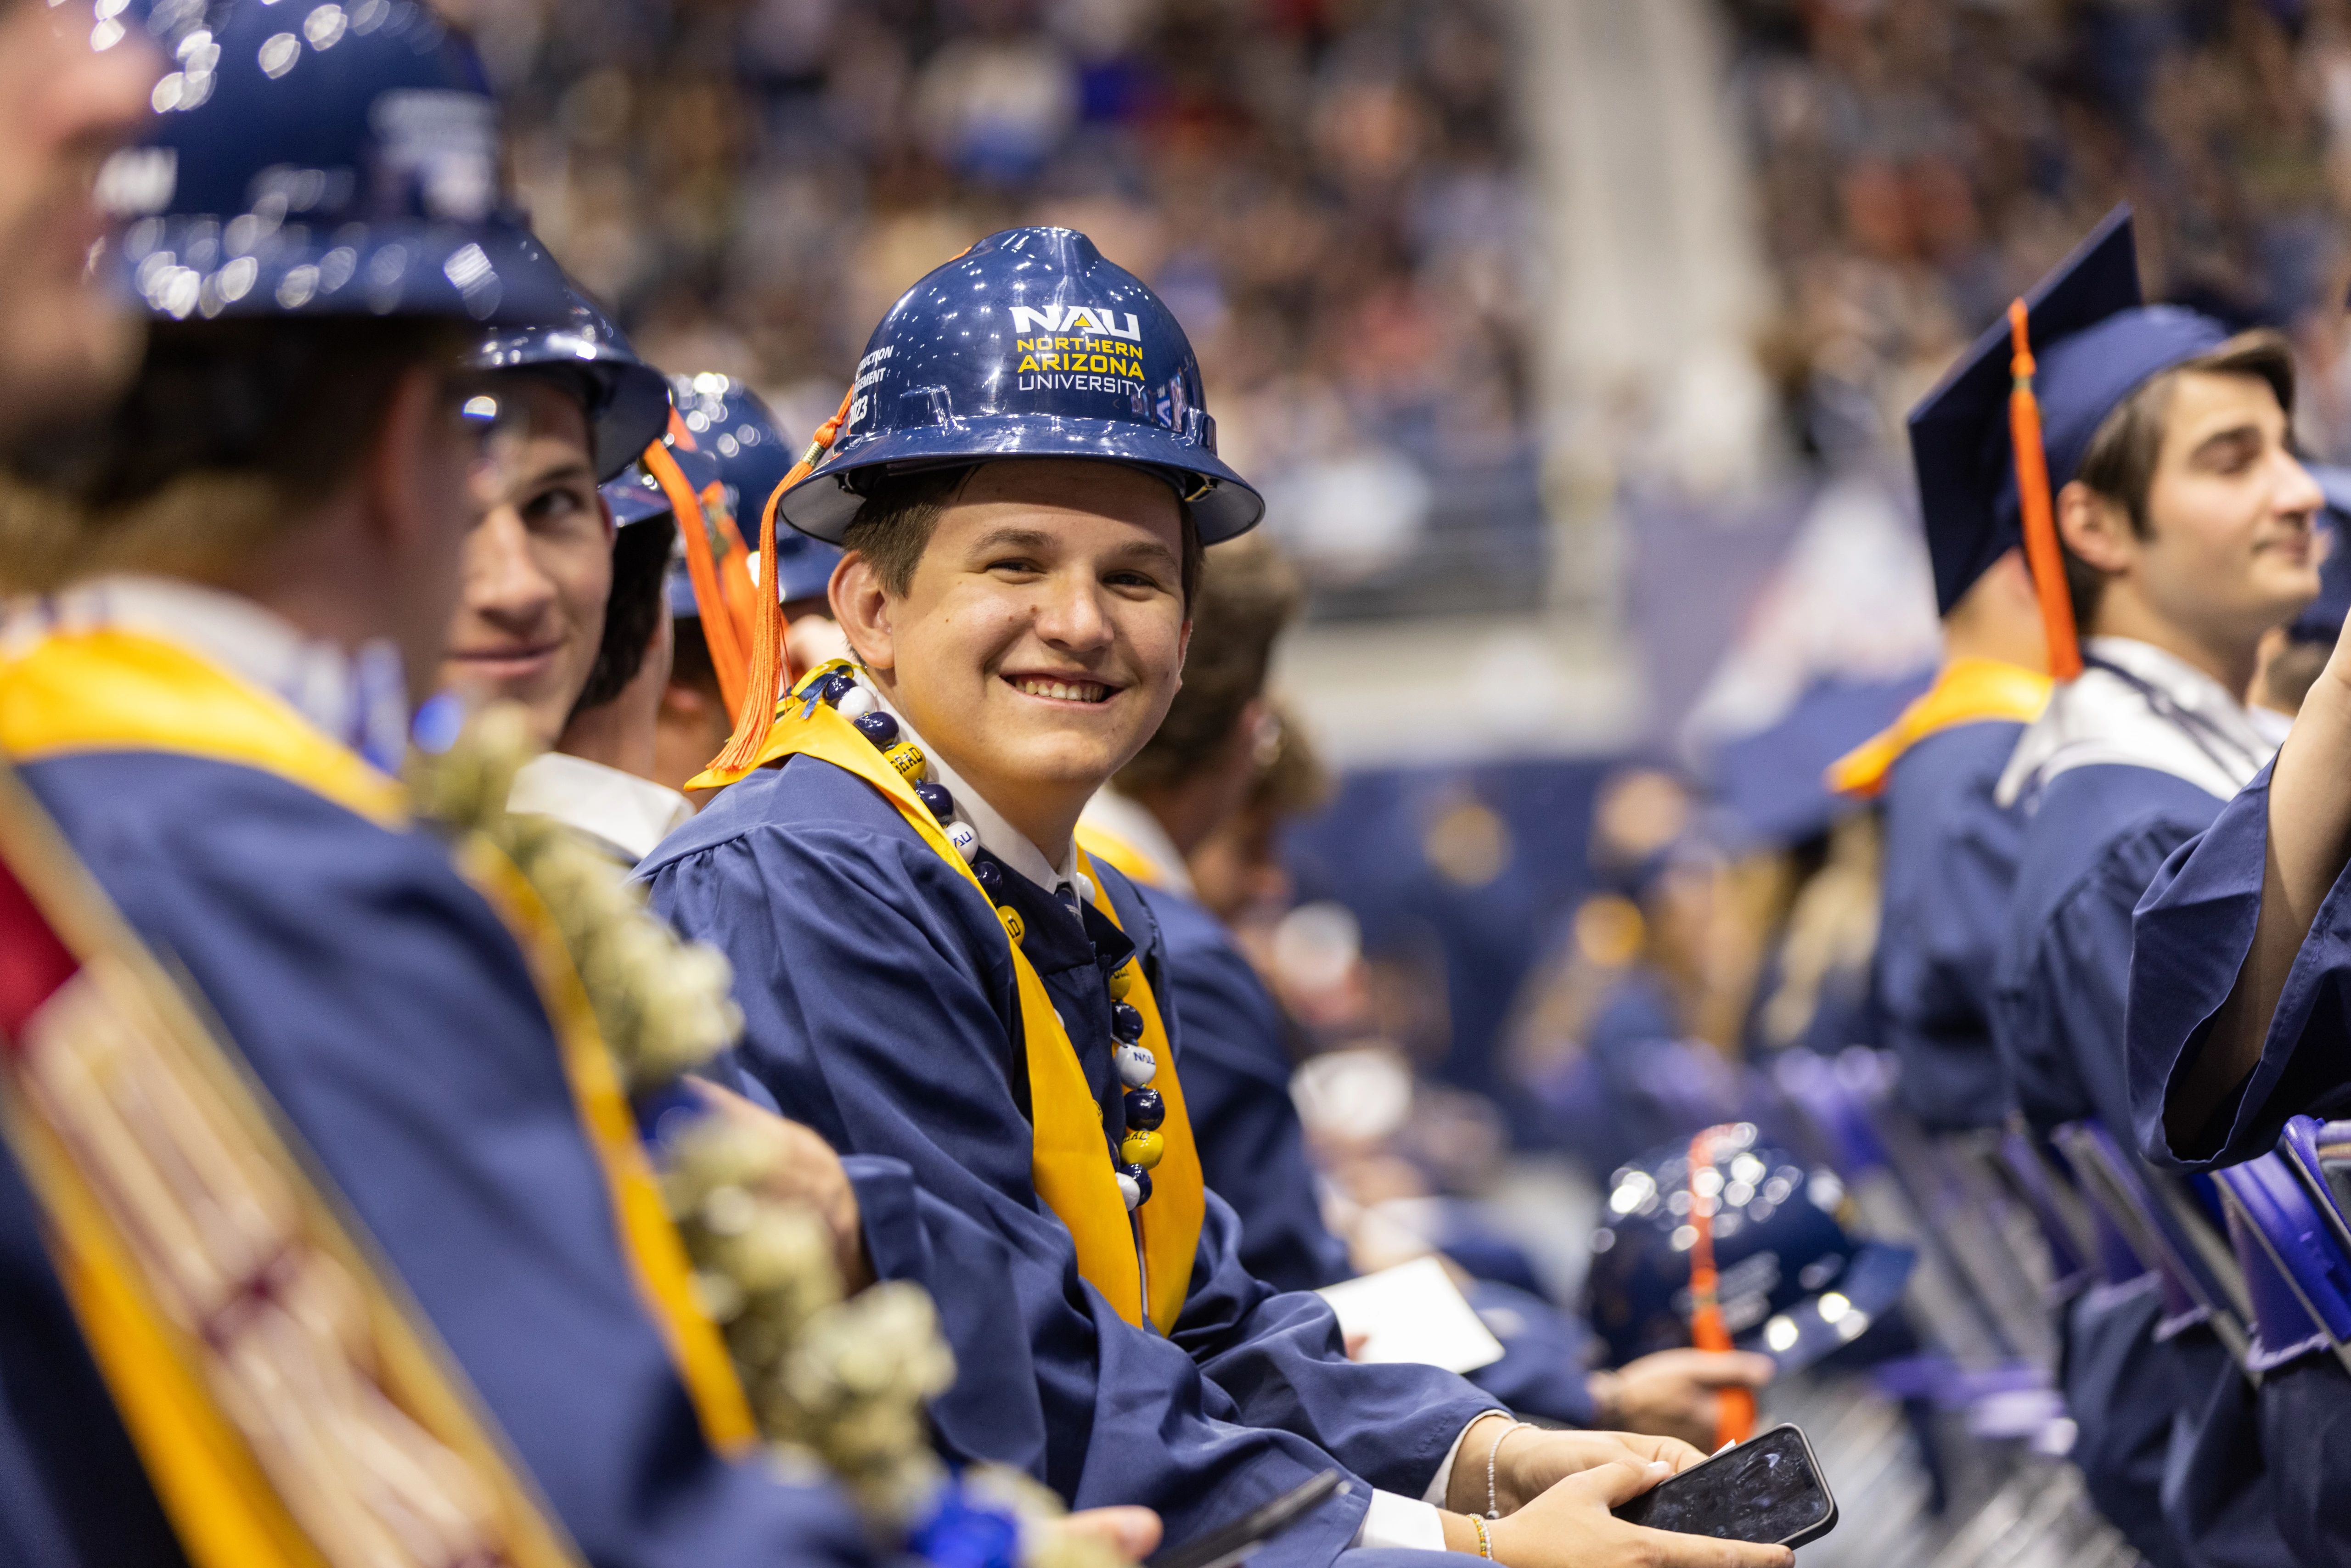 NAU students sitting at commencement wearing construction hardhats with the NAU logo on them